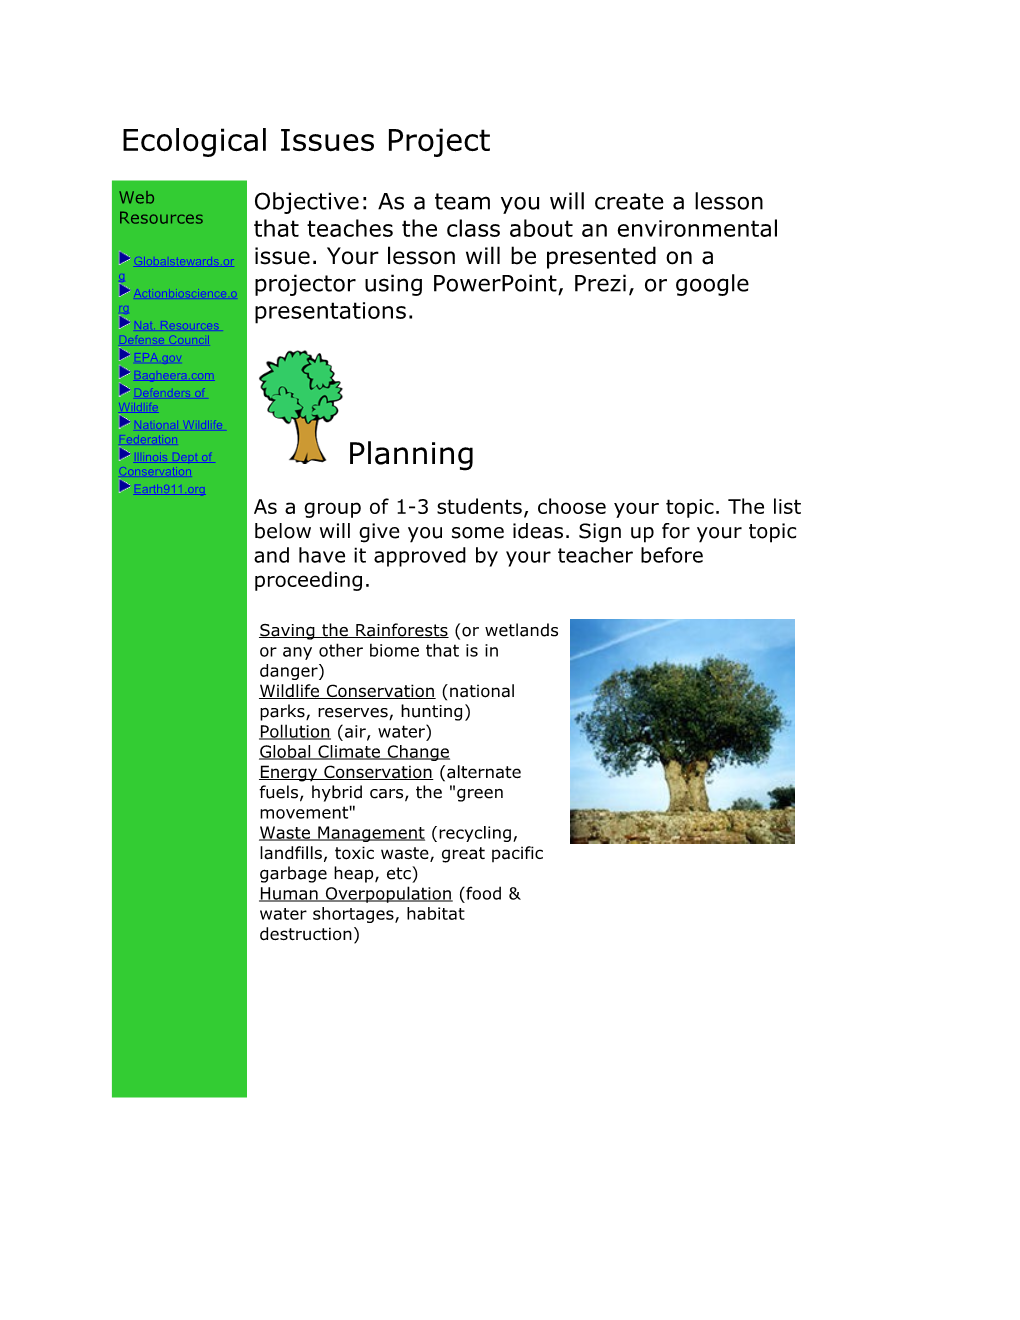 Ecology Issues Project